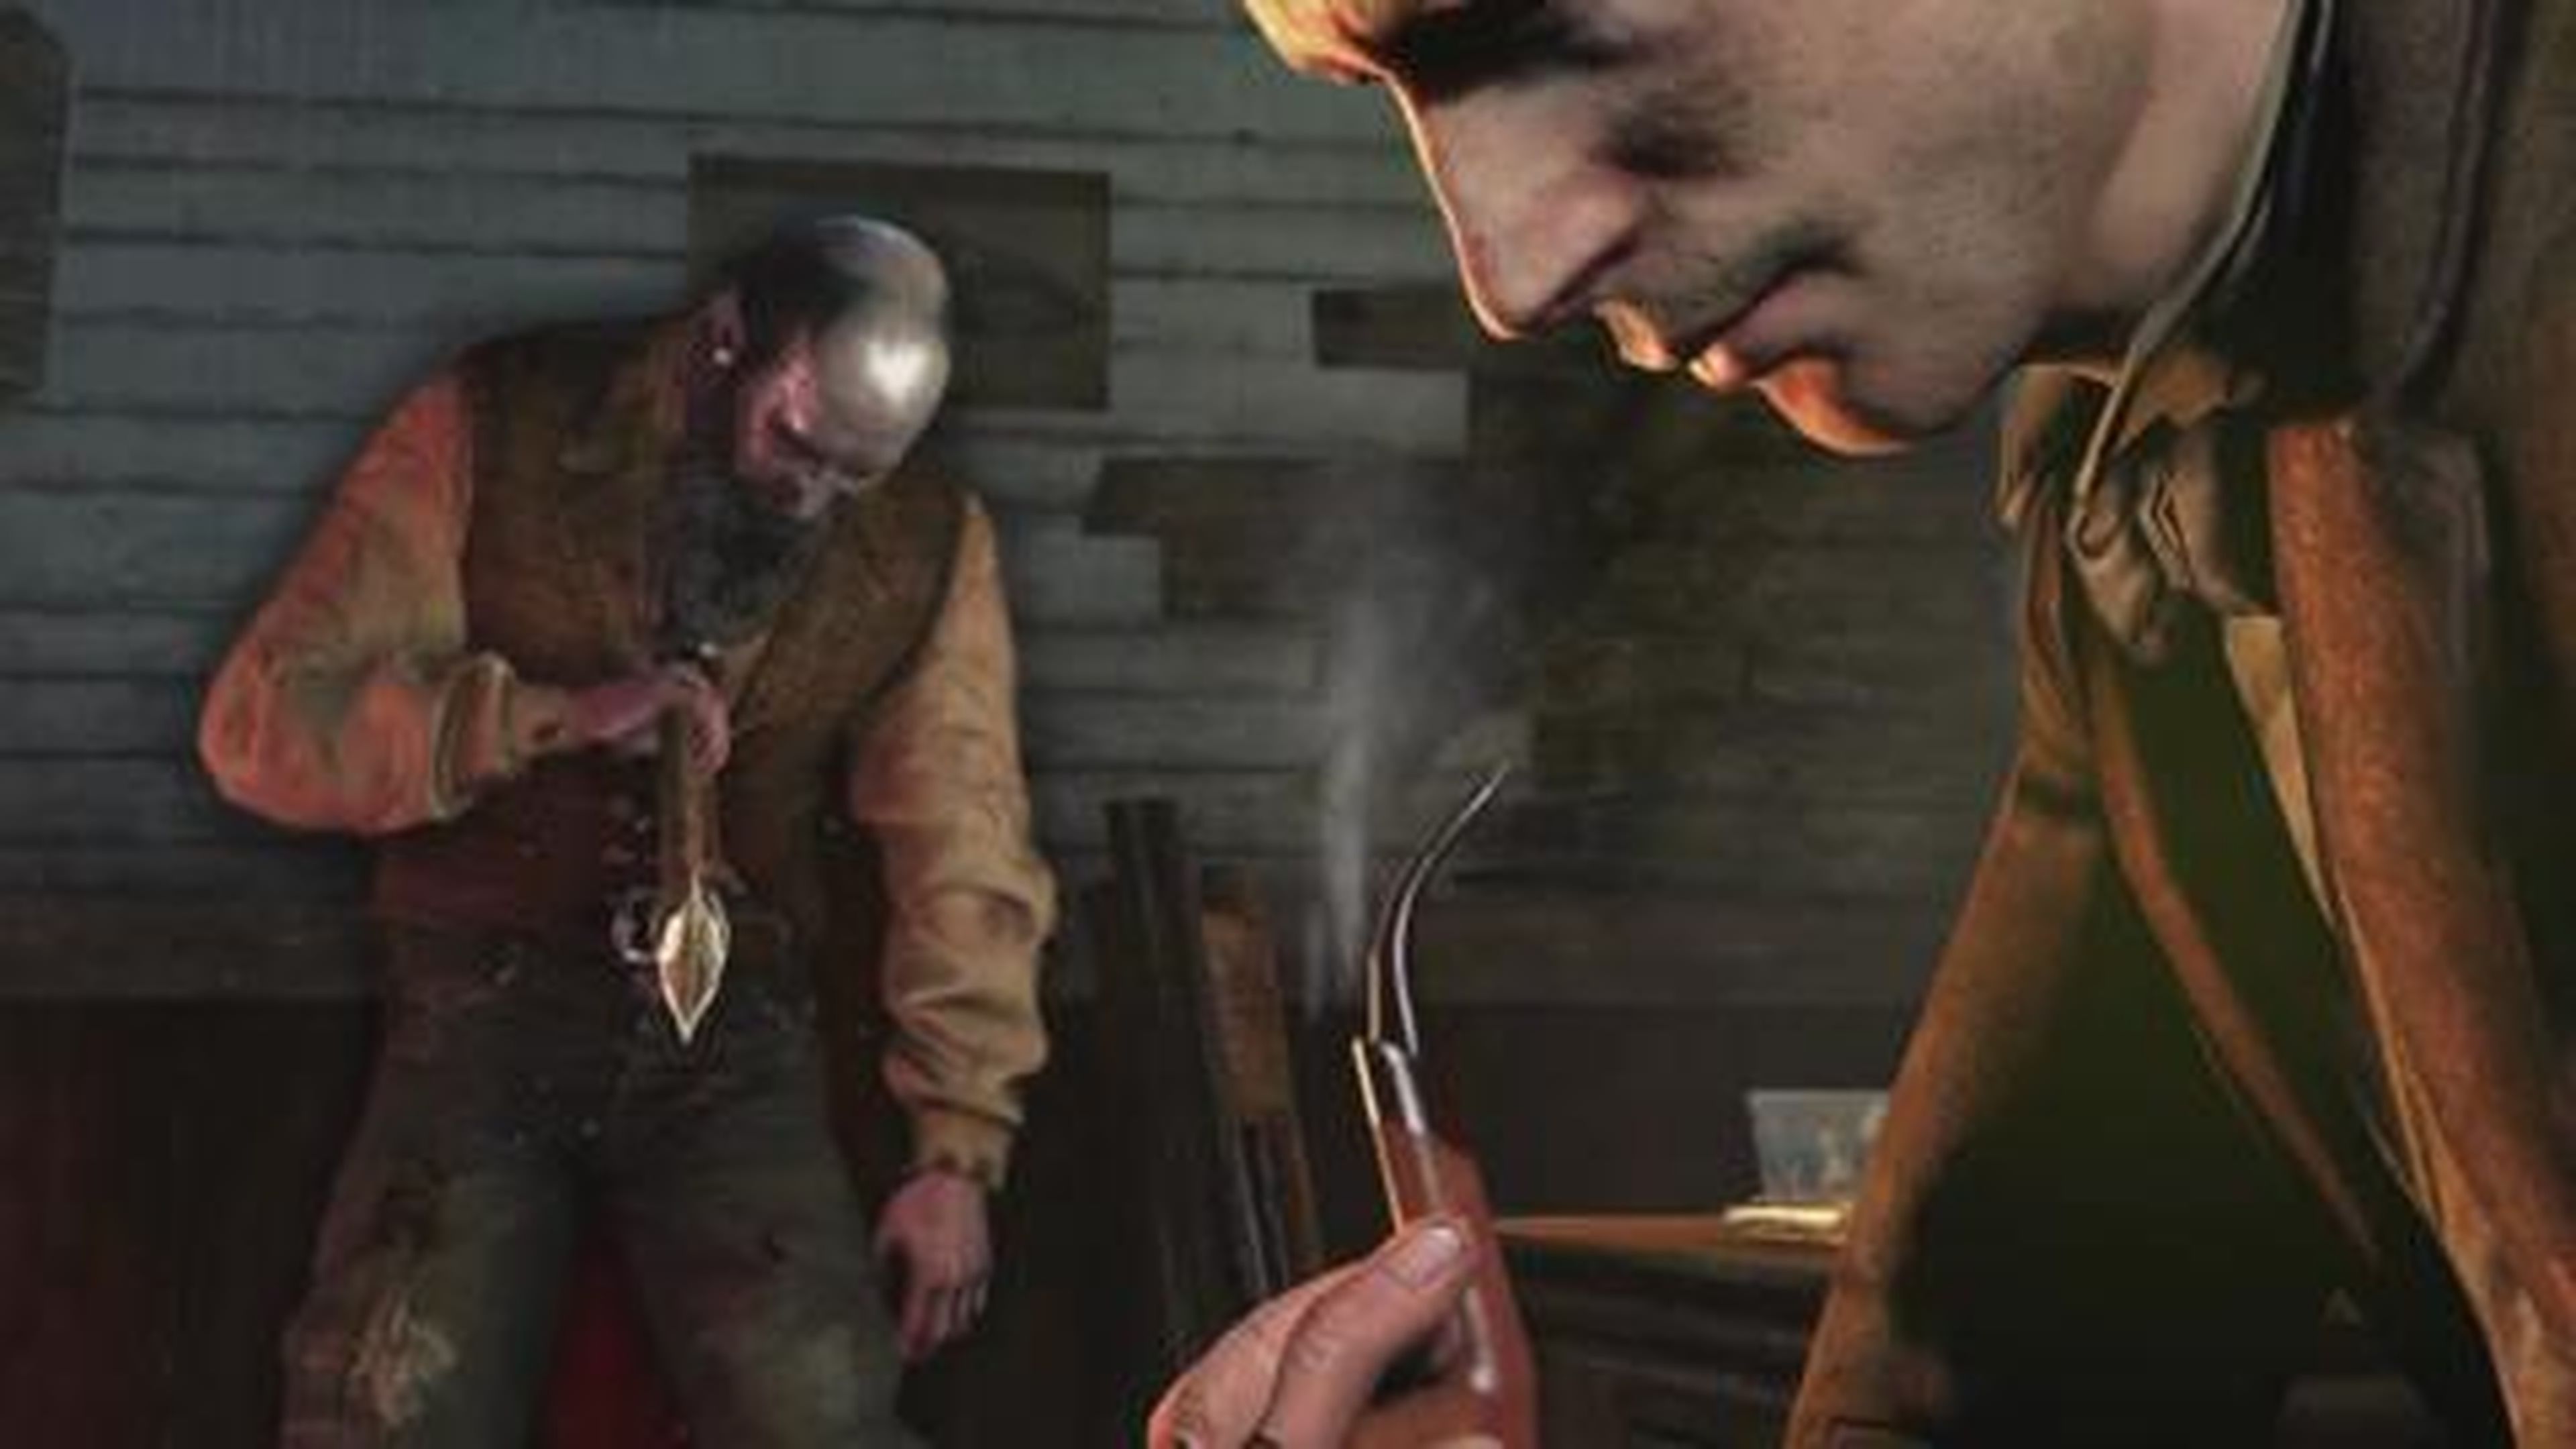 NEW - Sherlock Holmes- Crimes and Punishments trailer PS4 & PS3 gameplay